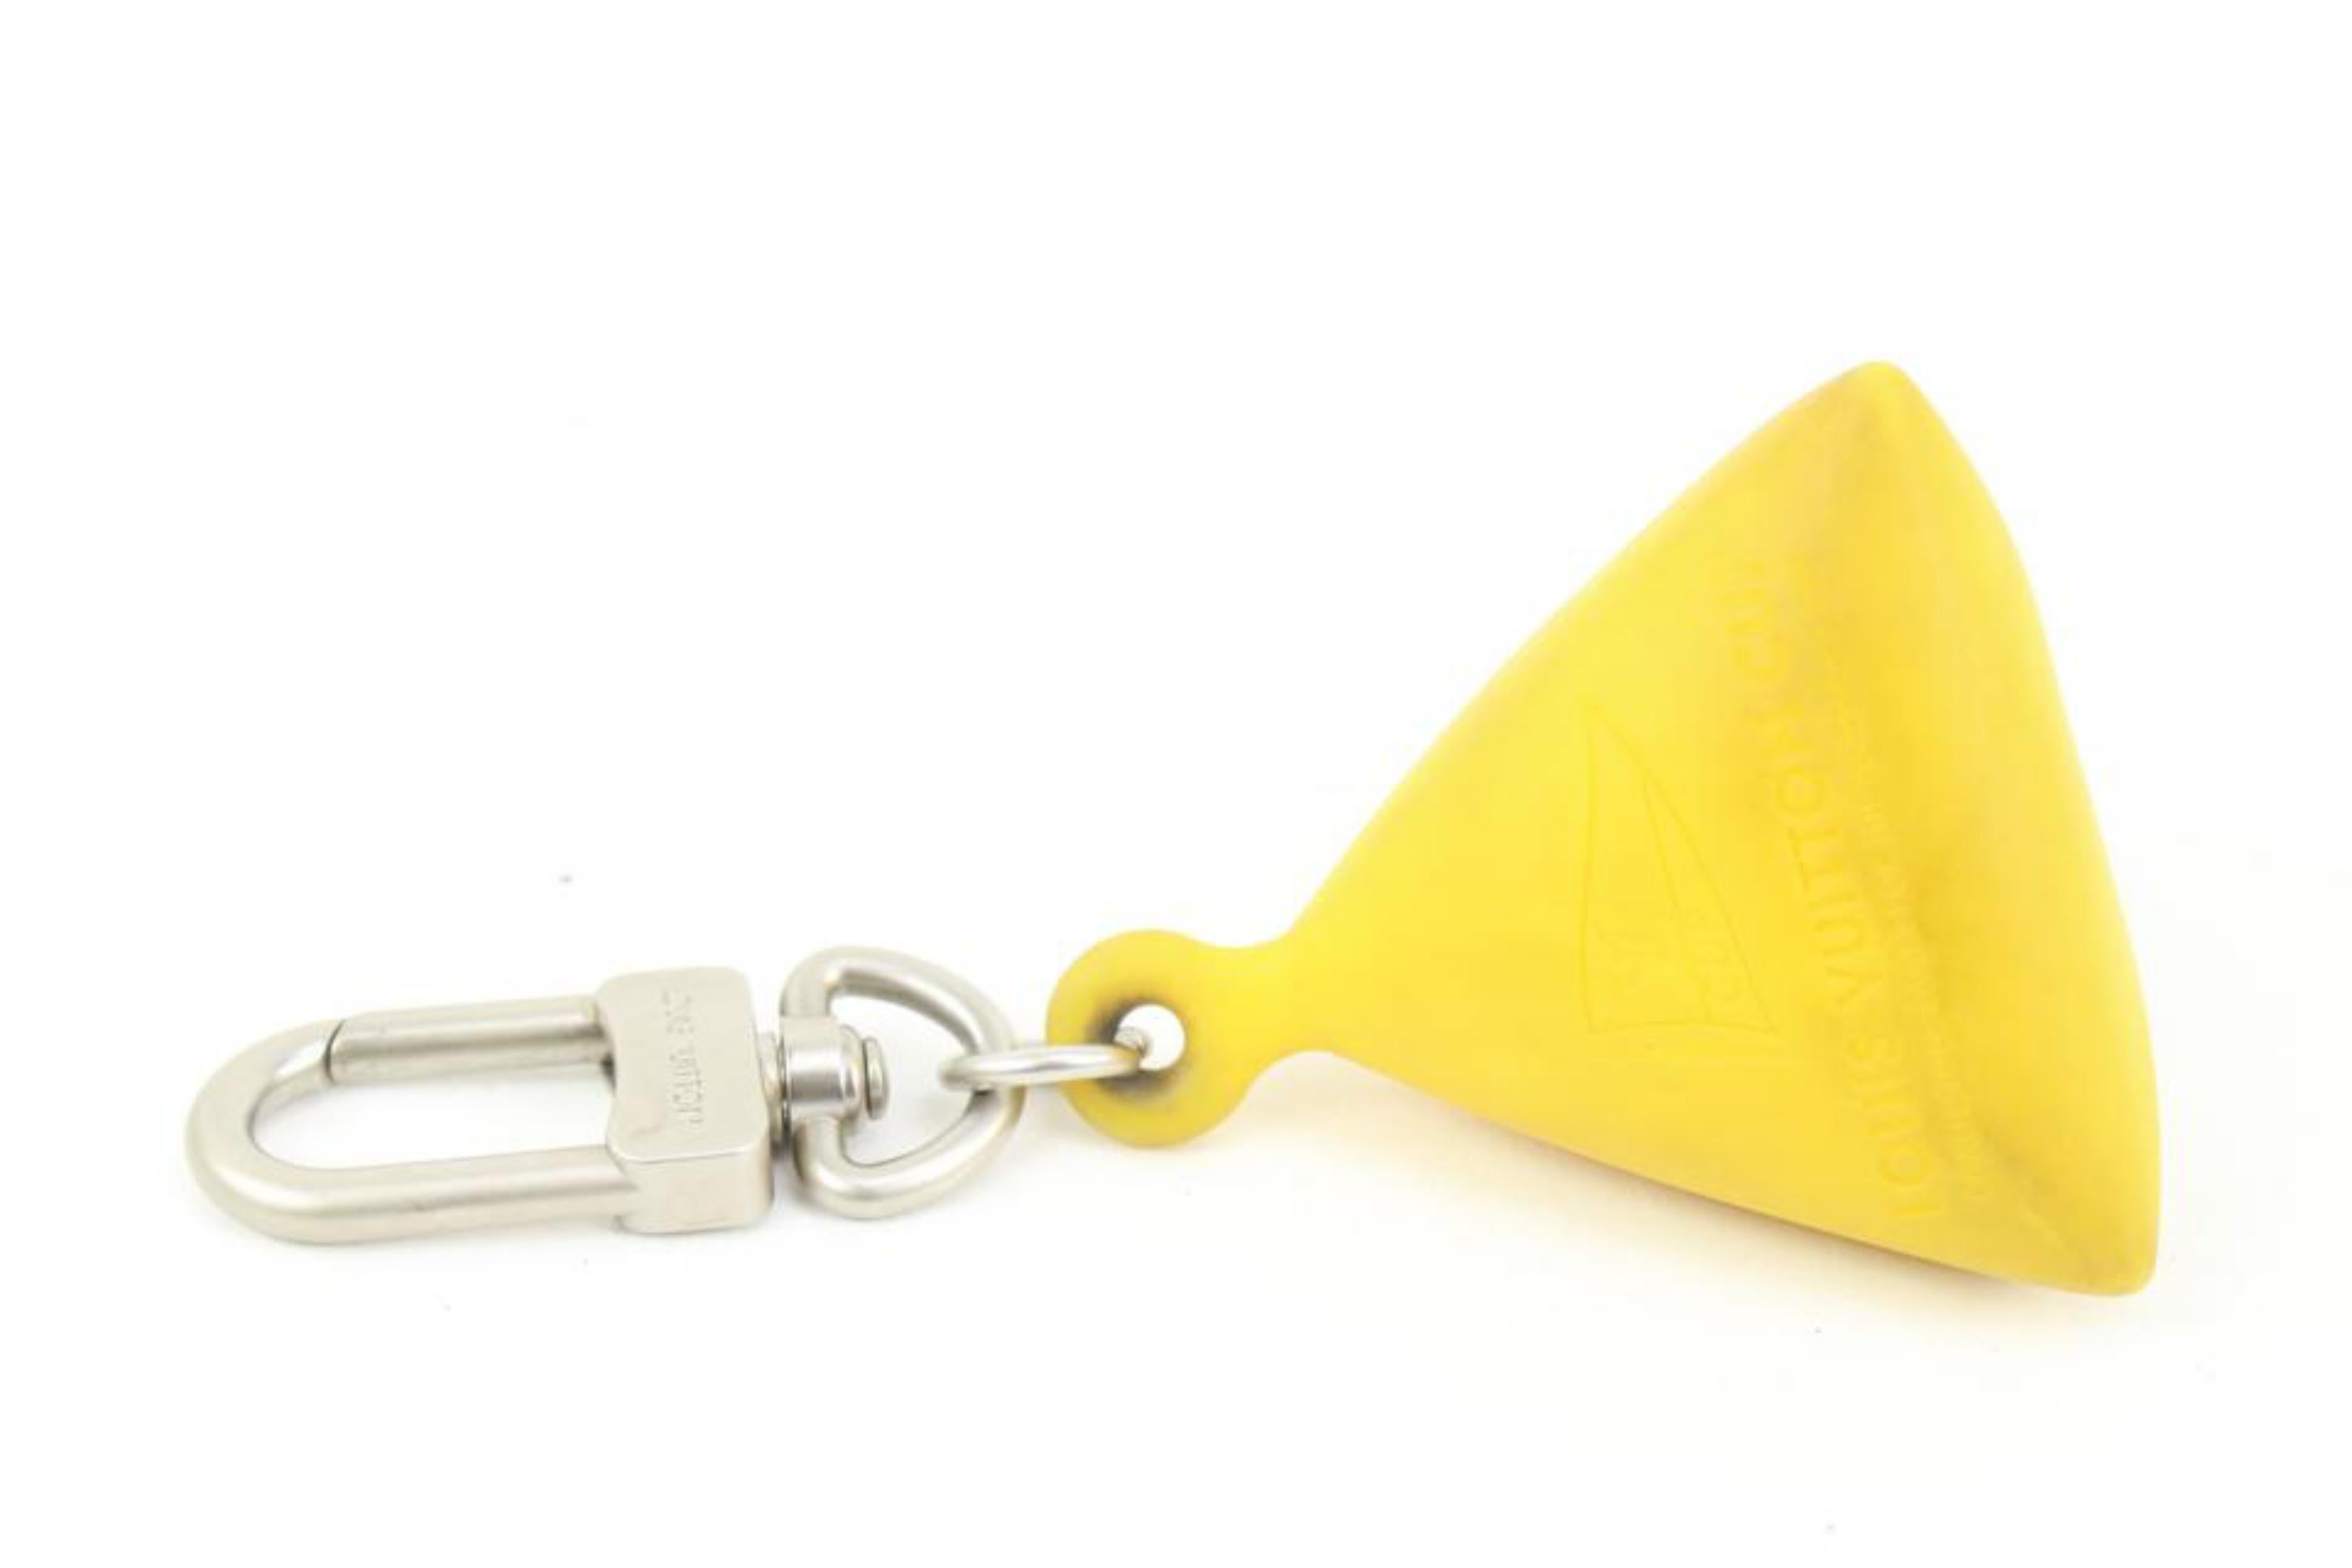 Louis Vuitton Yellow LV America's Cup Keychain Pendant Bag Charm 83lk422s In Fair Condition For Sale In Dix hills, NY